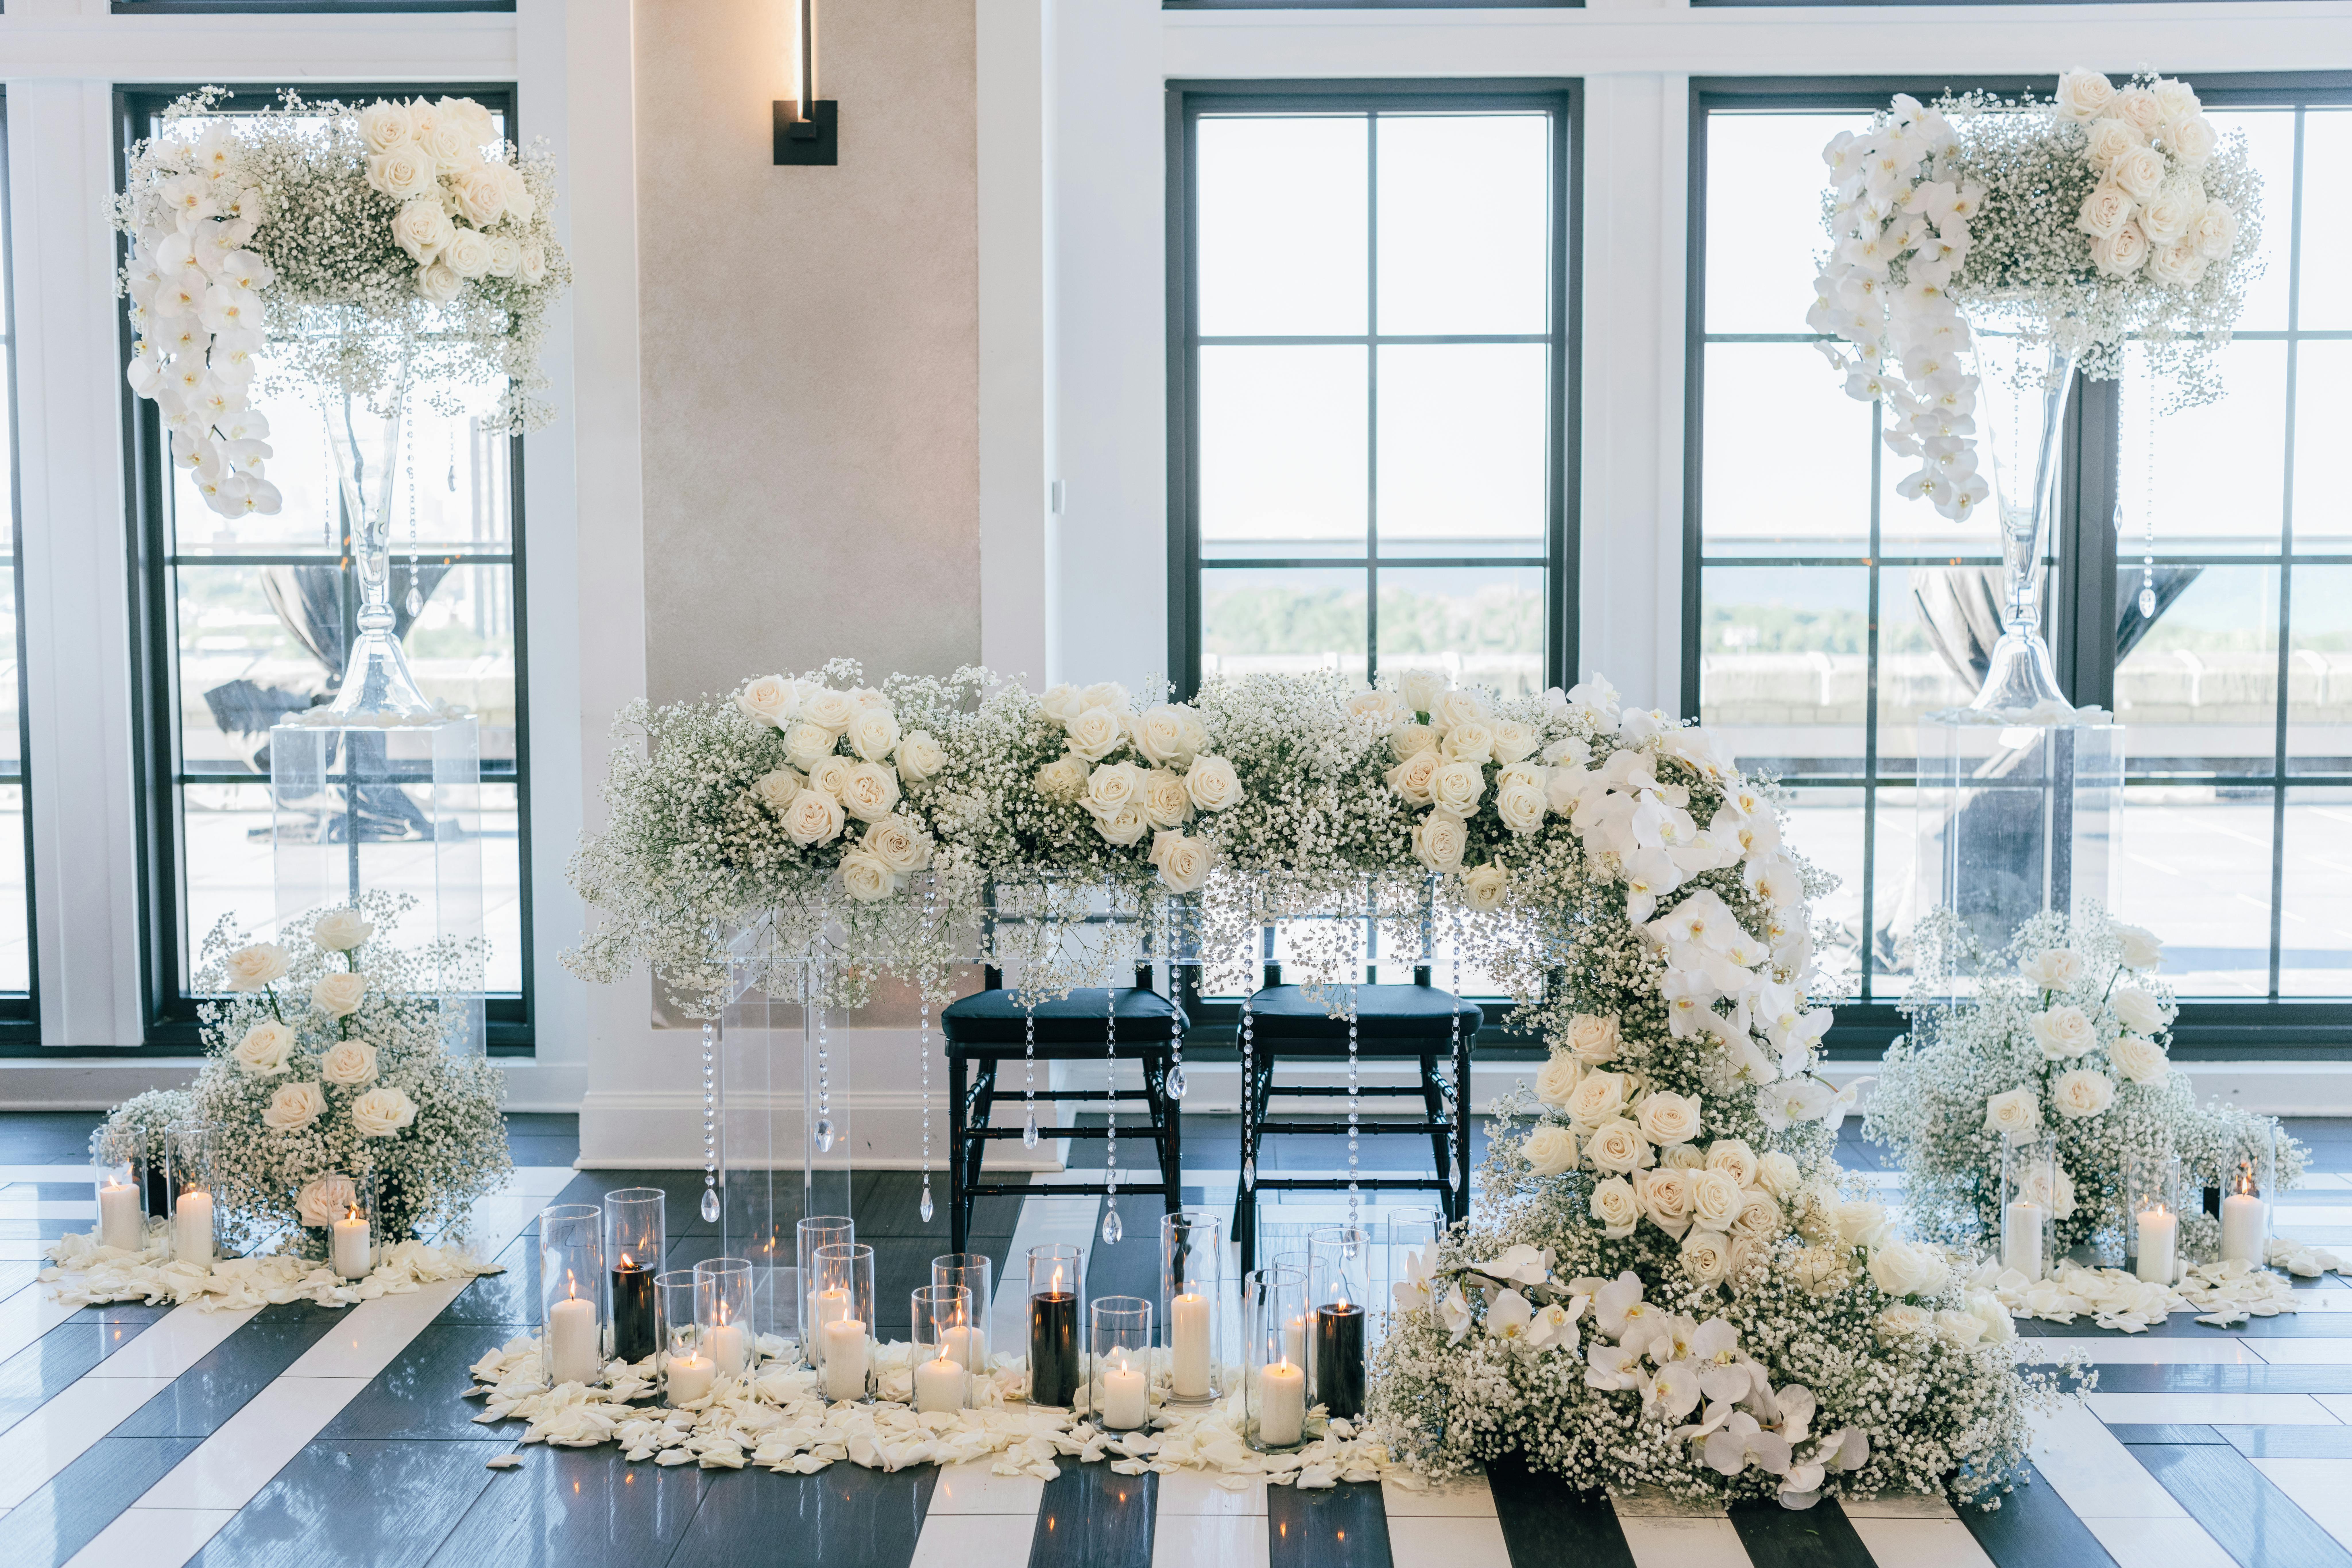 12 Black and White Wedding Ideas for a Stunning Celebration - PartySlate